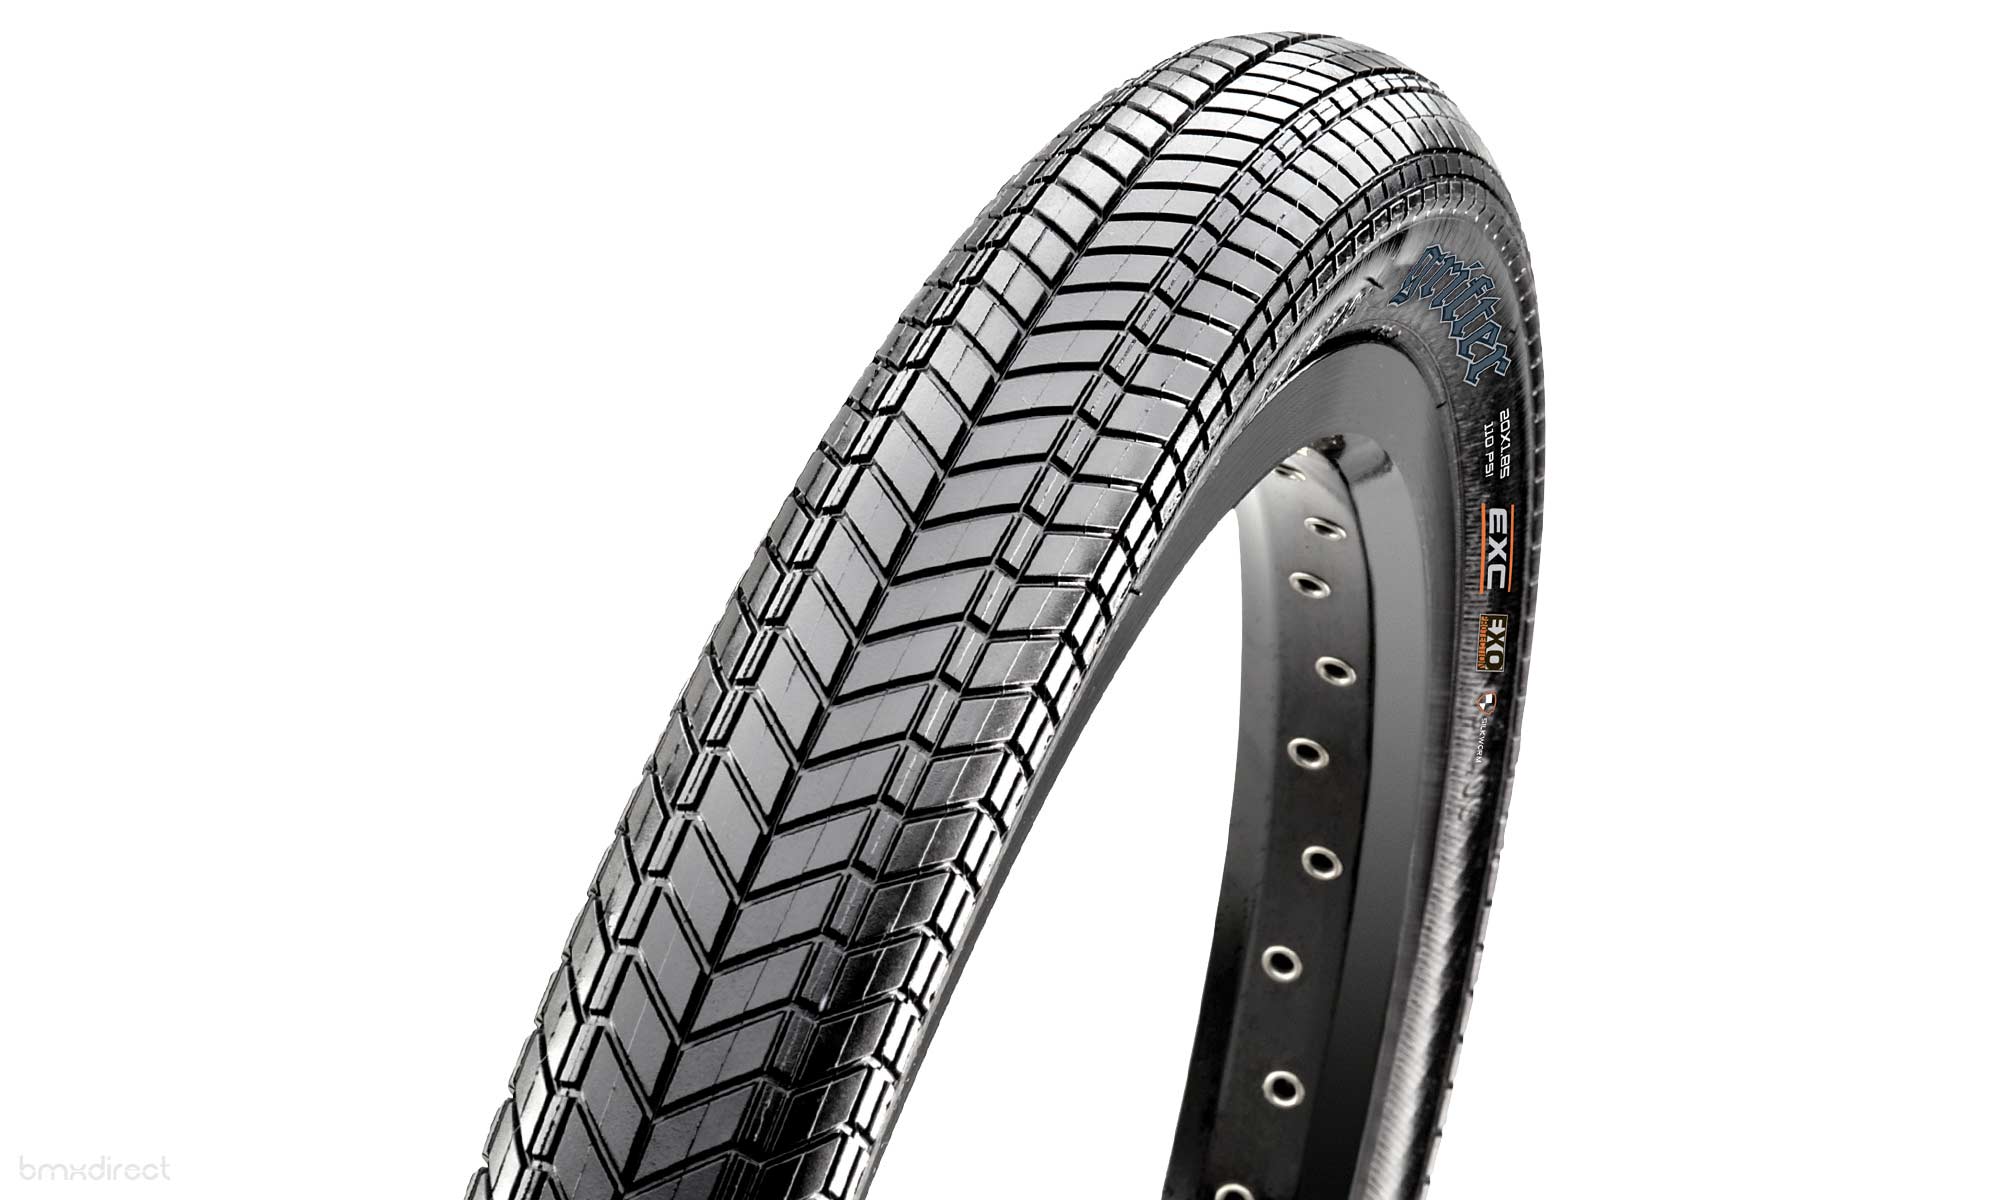 Maxxis Grifter Foldable Tyre - Black 2.4